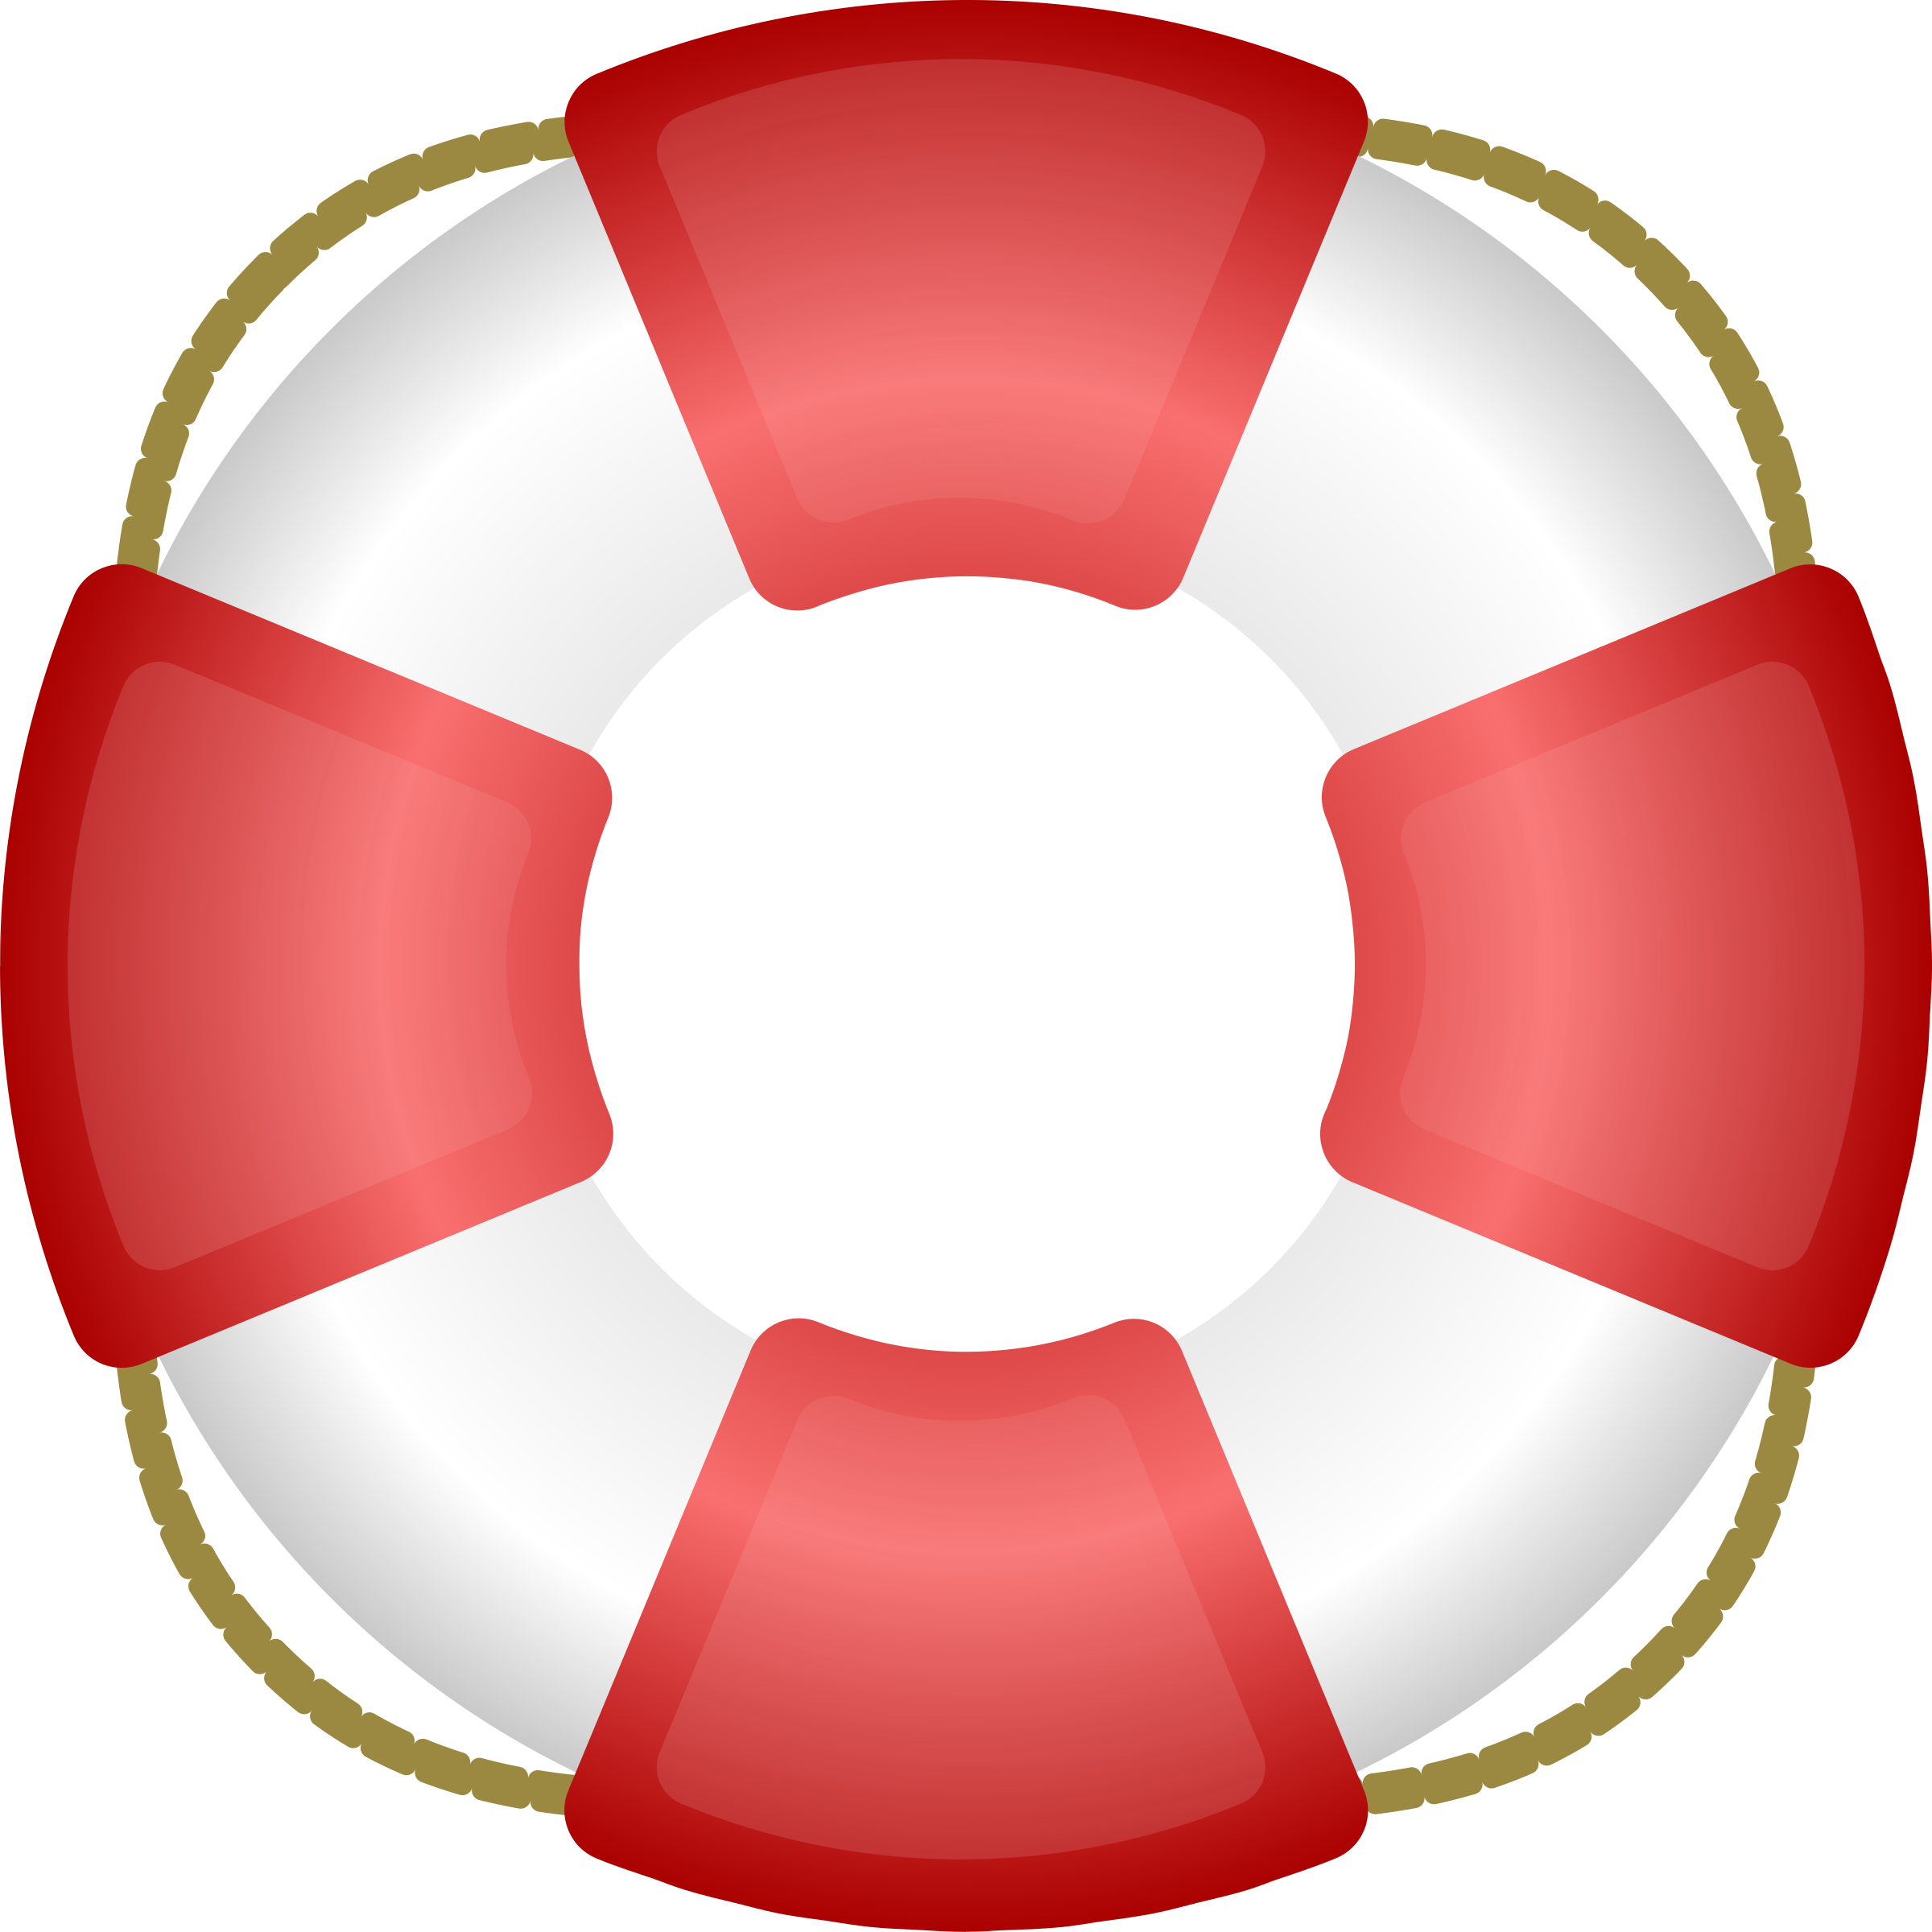 Cliparts free download clip. Lifeguard clipart inner tube float